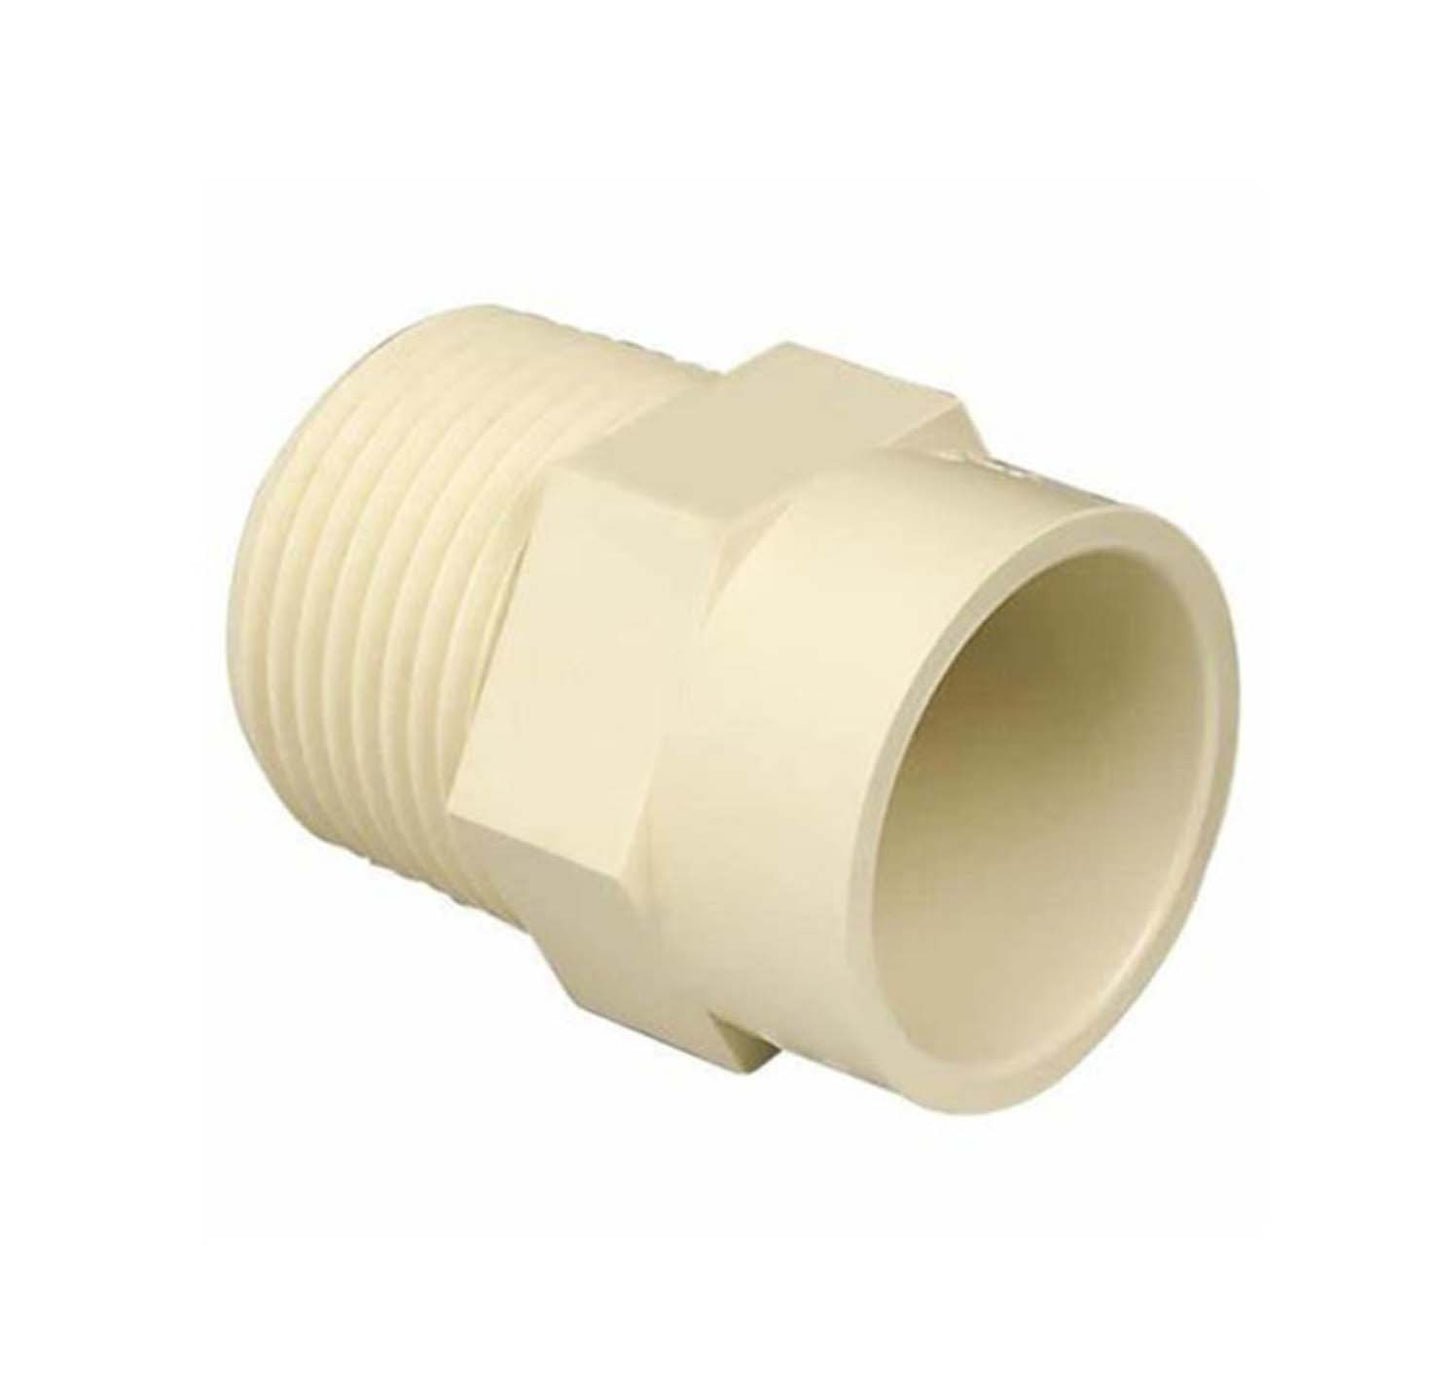 Ashirvad CPVC Reducing Male Adapter Plastic Threaded